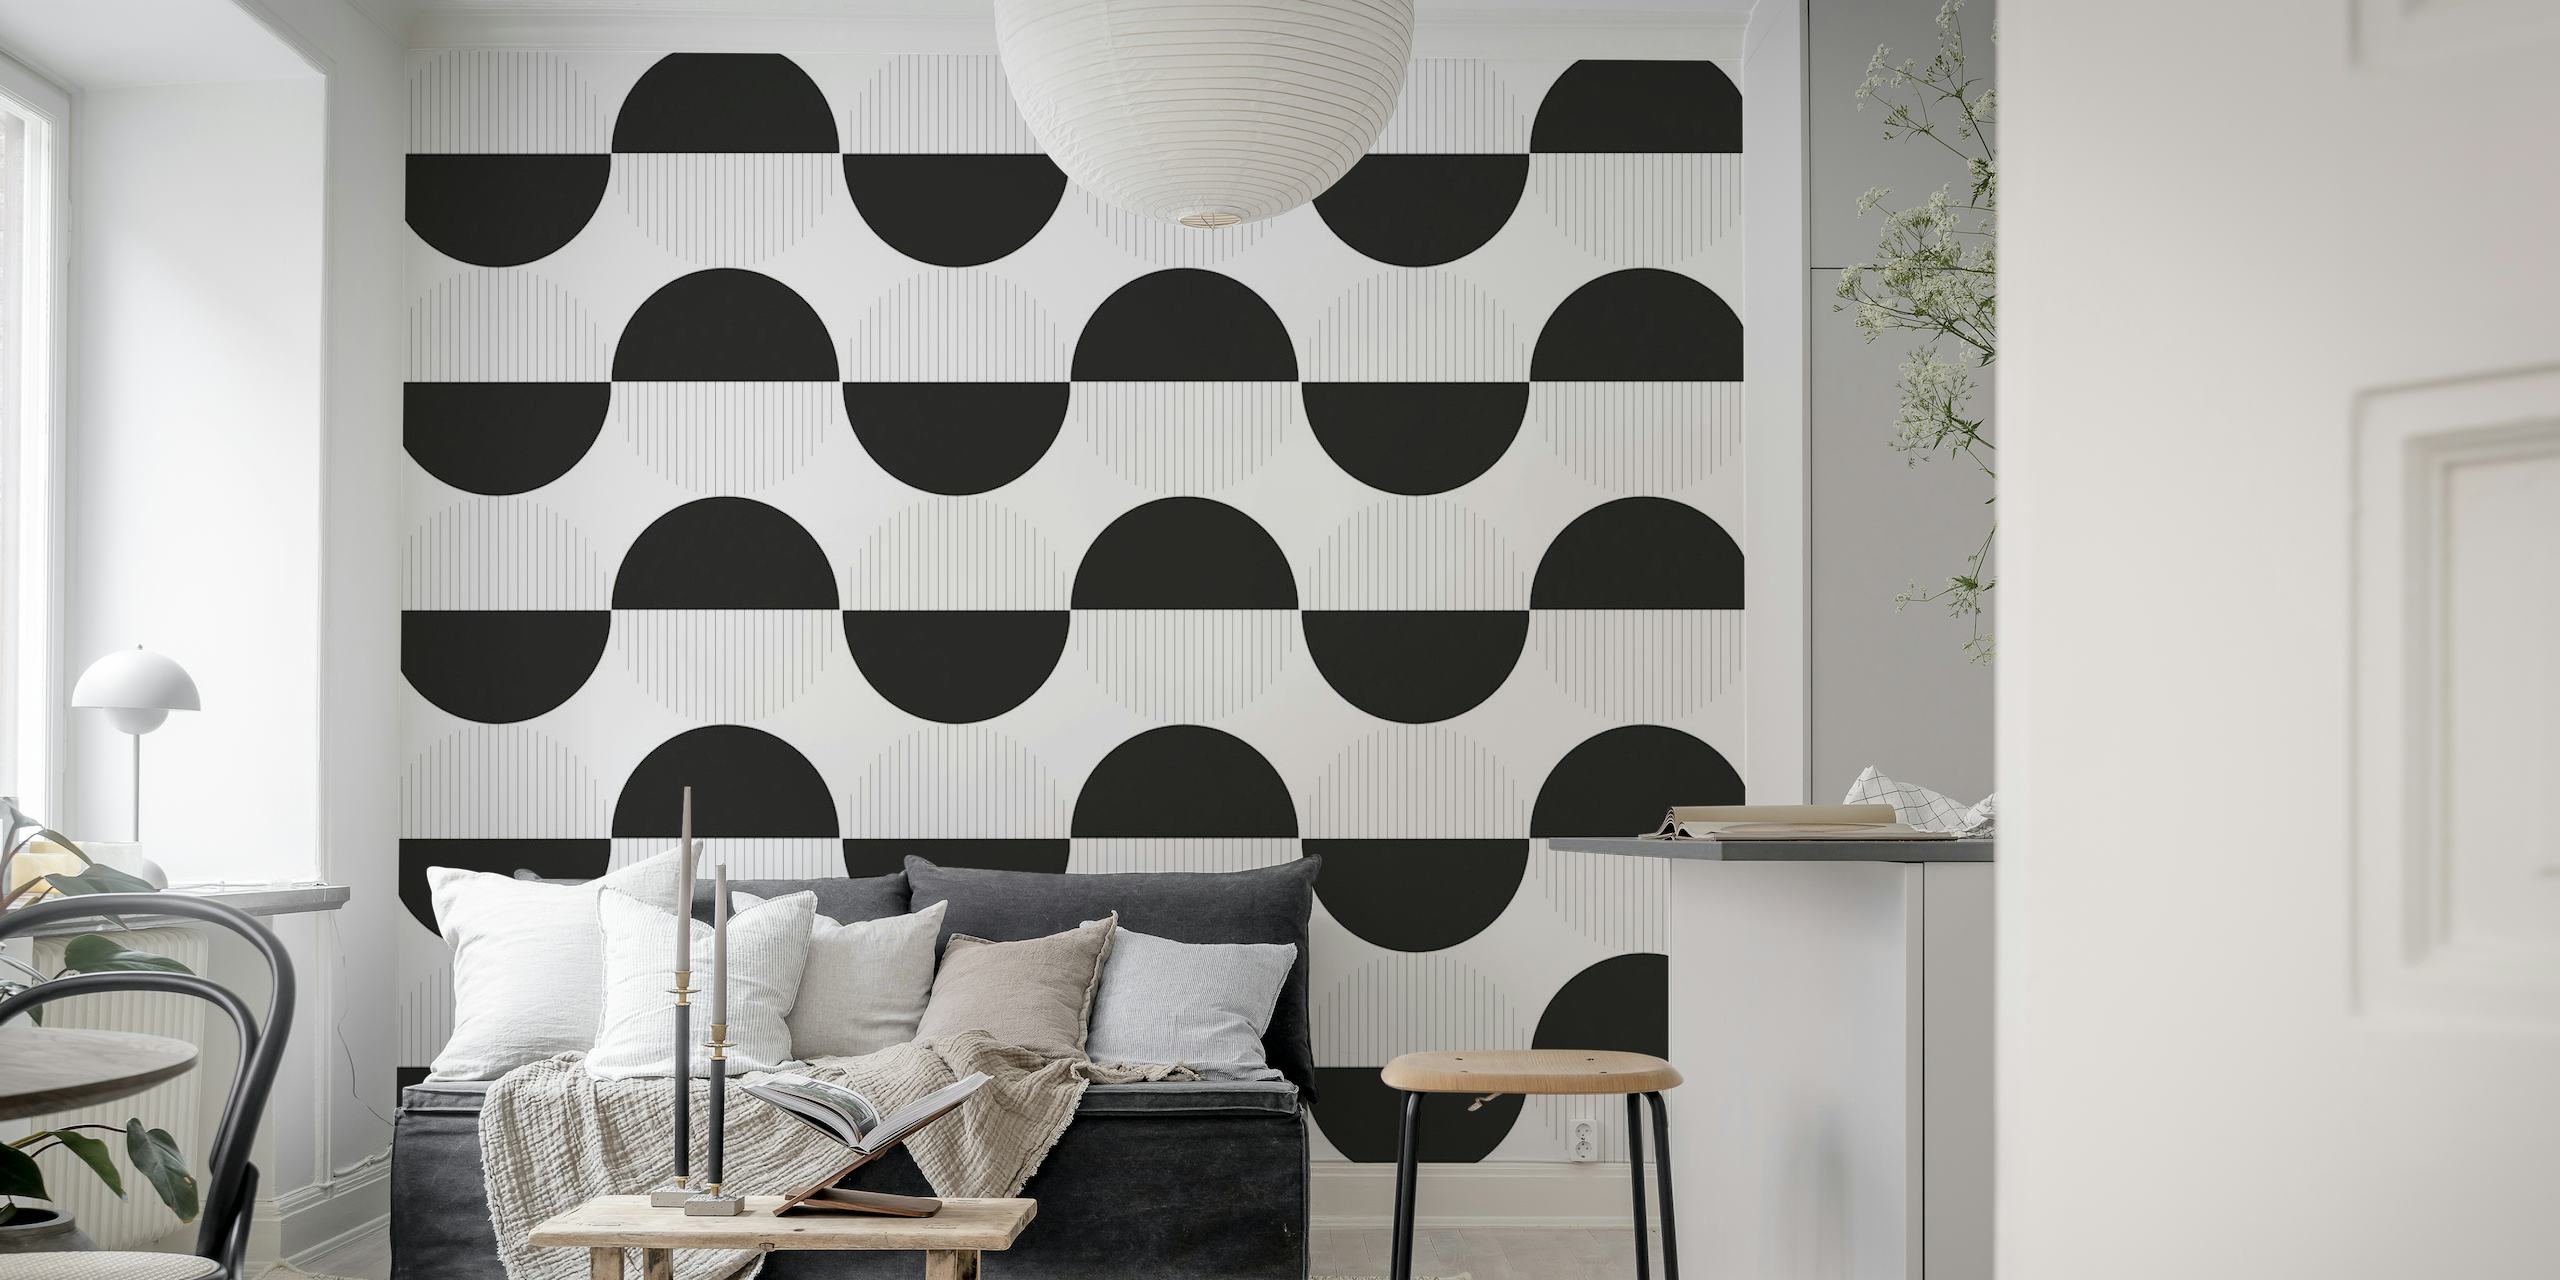 Monochromatic vintage pattern wall mural with curving lines